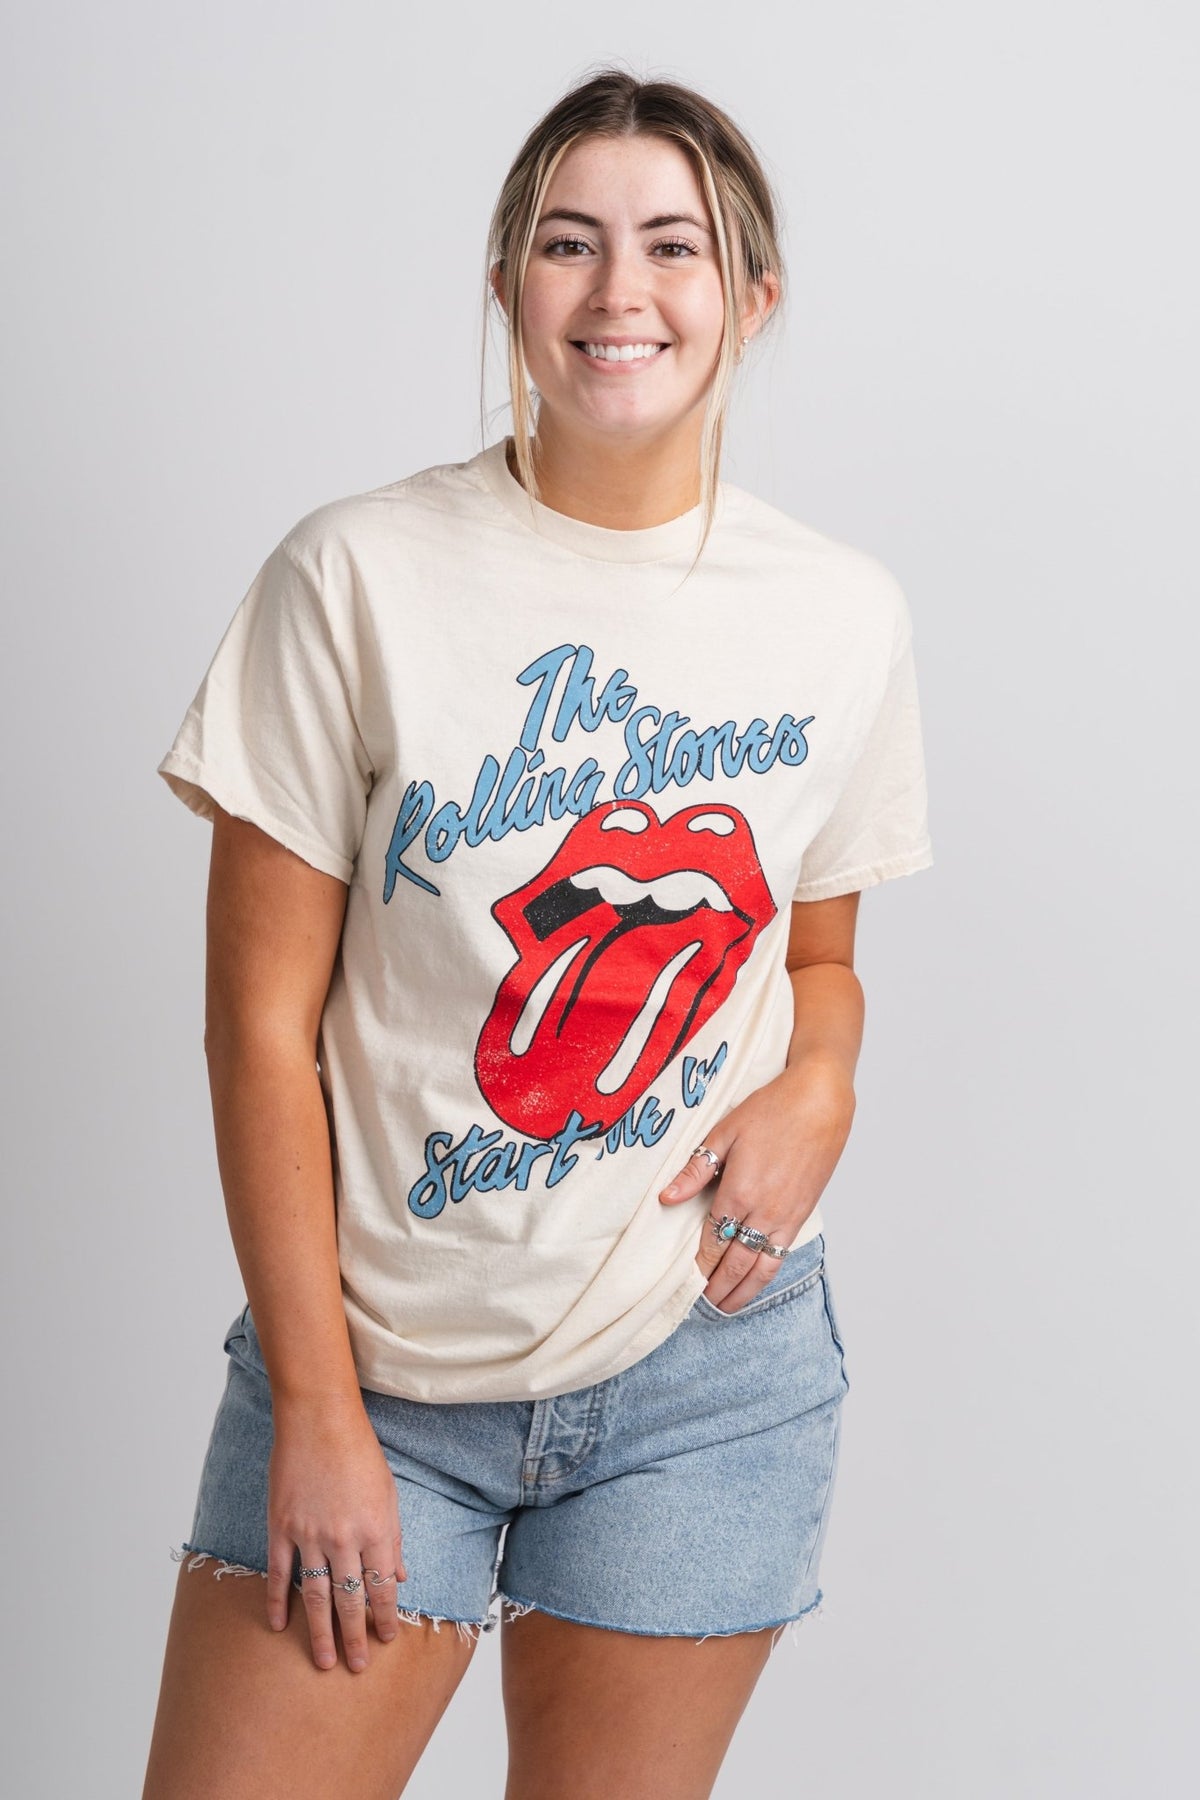 Rolling Stones start me up thrifted t-shirt - Trendy Band T-Shirts and Sweatshirts at Lush Fashion Lounge Boutique in Oklahoma City